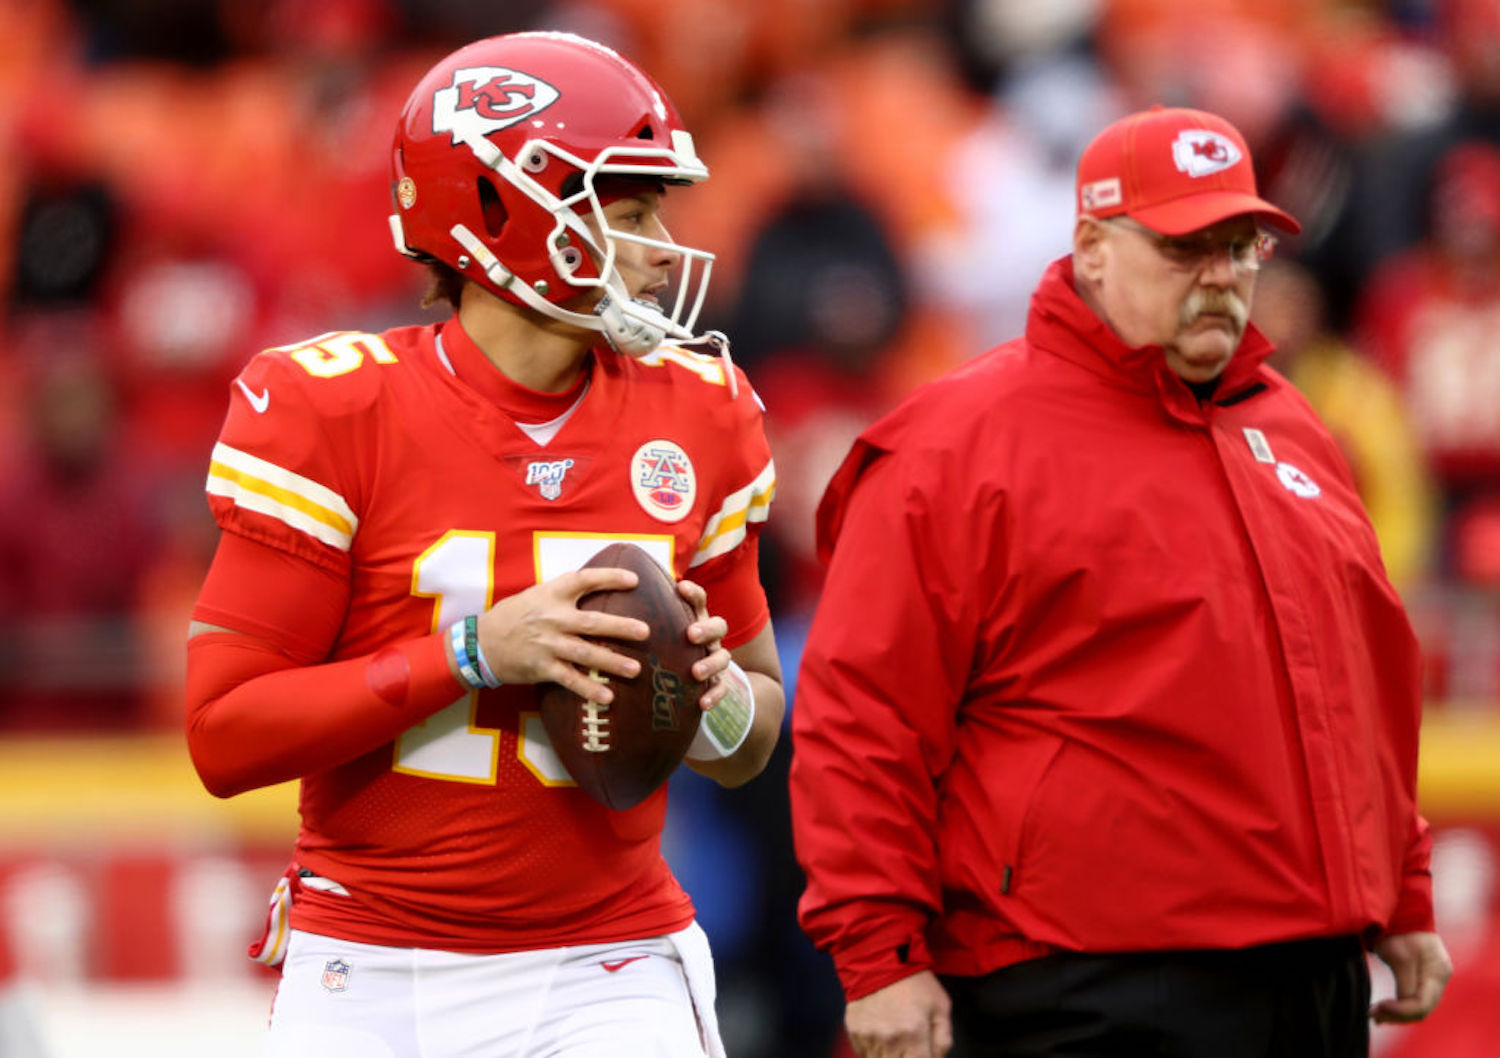 Patrick Mahomes might be the best quarterback in the NFL today, but his coach also believes he's on par with an all-time great.